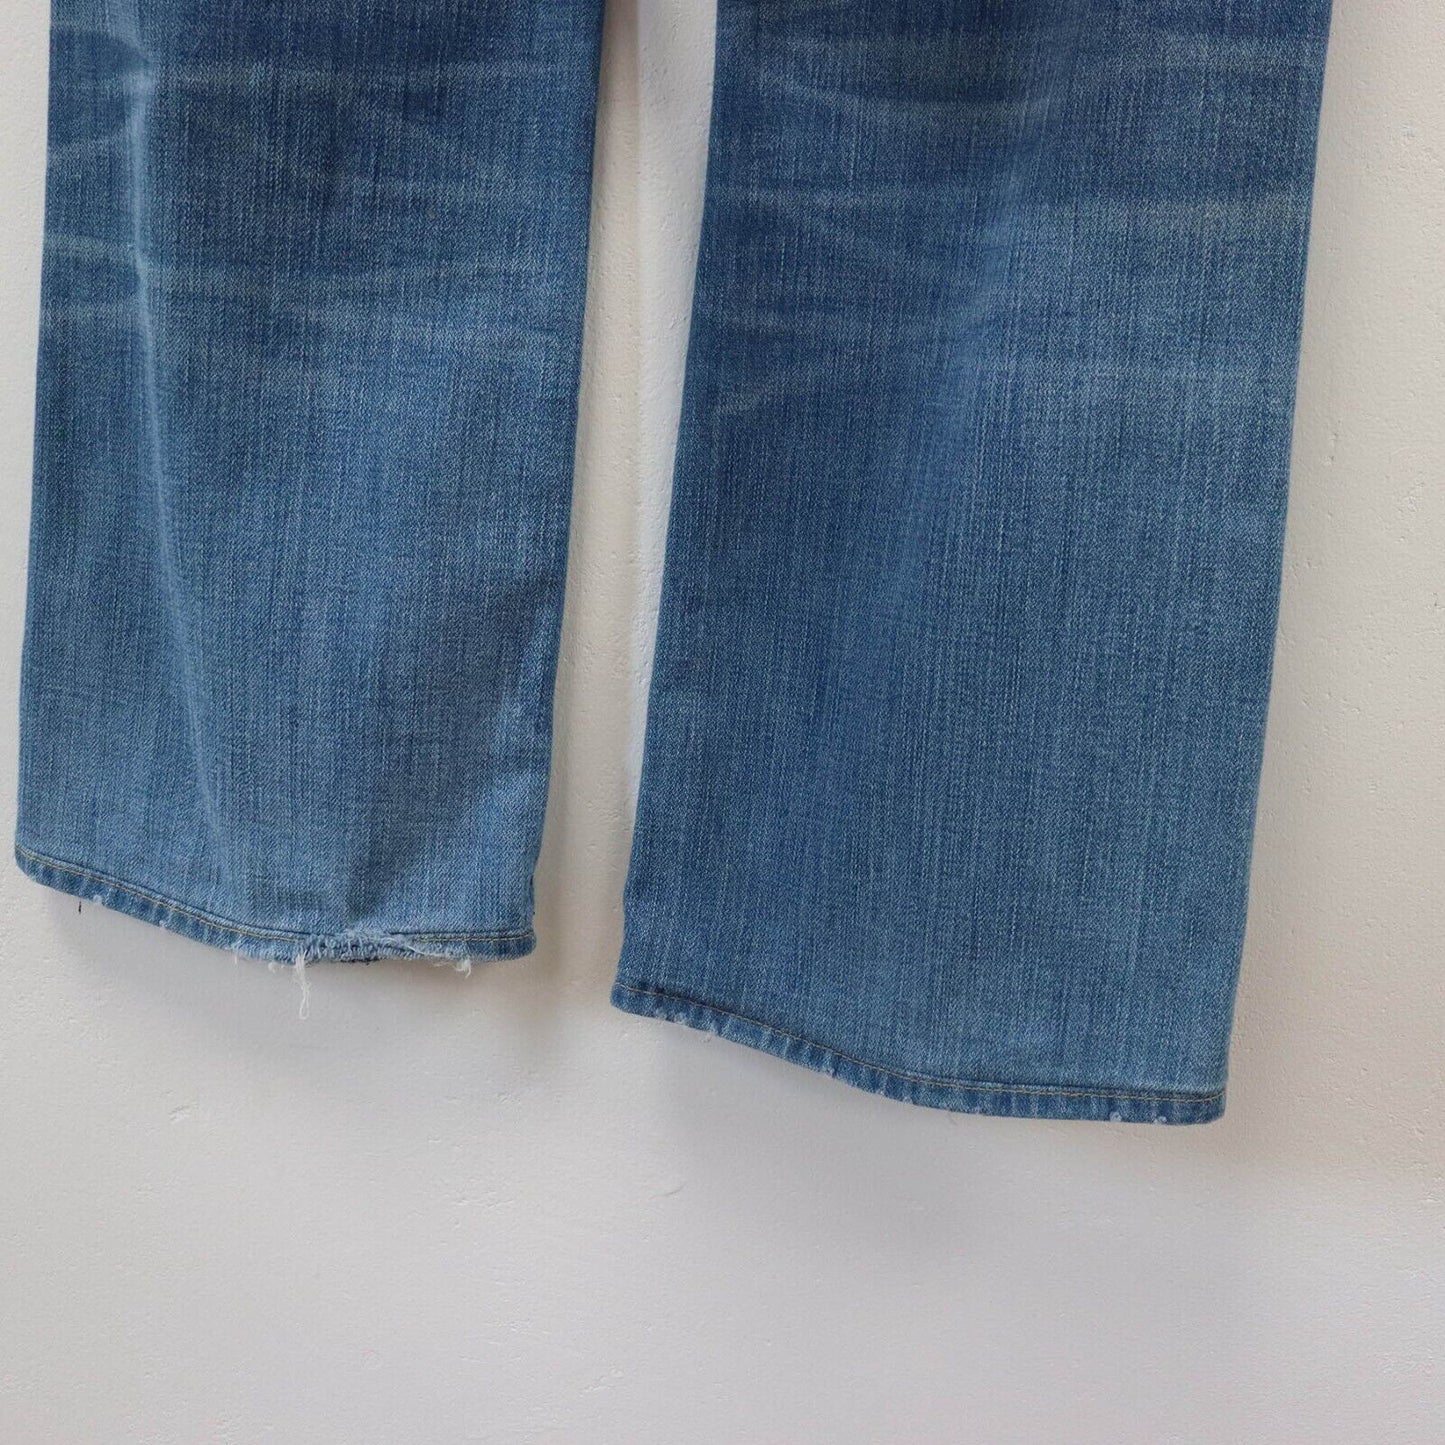 True Religion Low Rise Flared Jeans Size UK12 L29